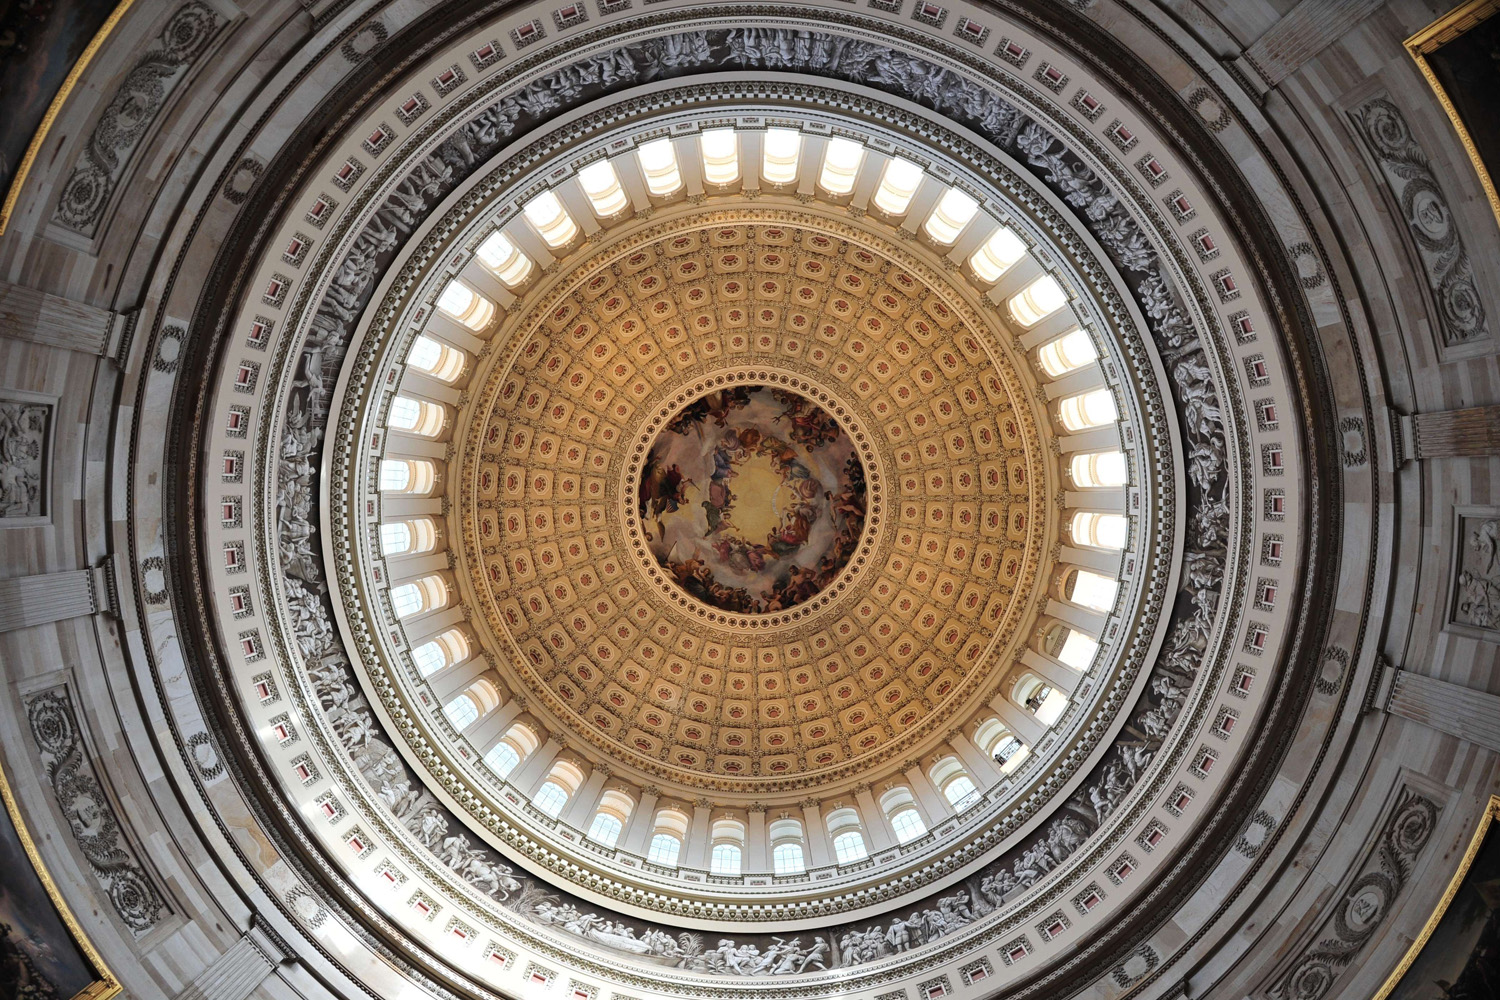 Dec. 19, 2013 A view looking up from the Rotunda of the U.S. Capitol before a tour of the dome in Washington, DC.